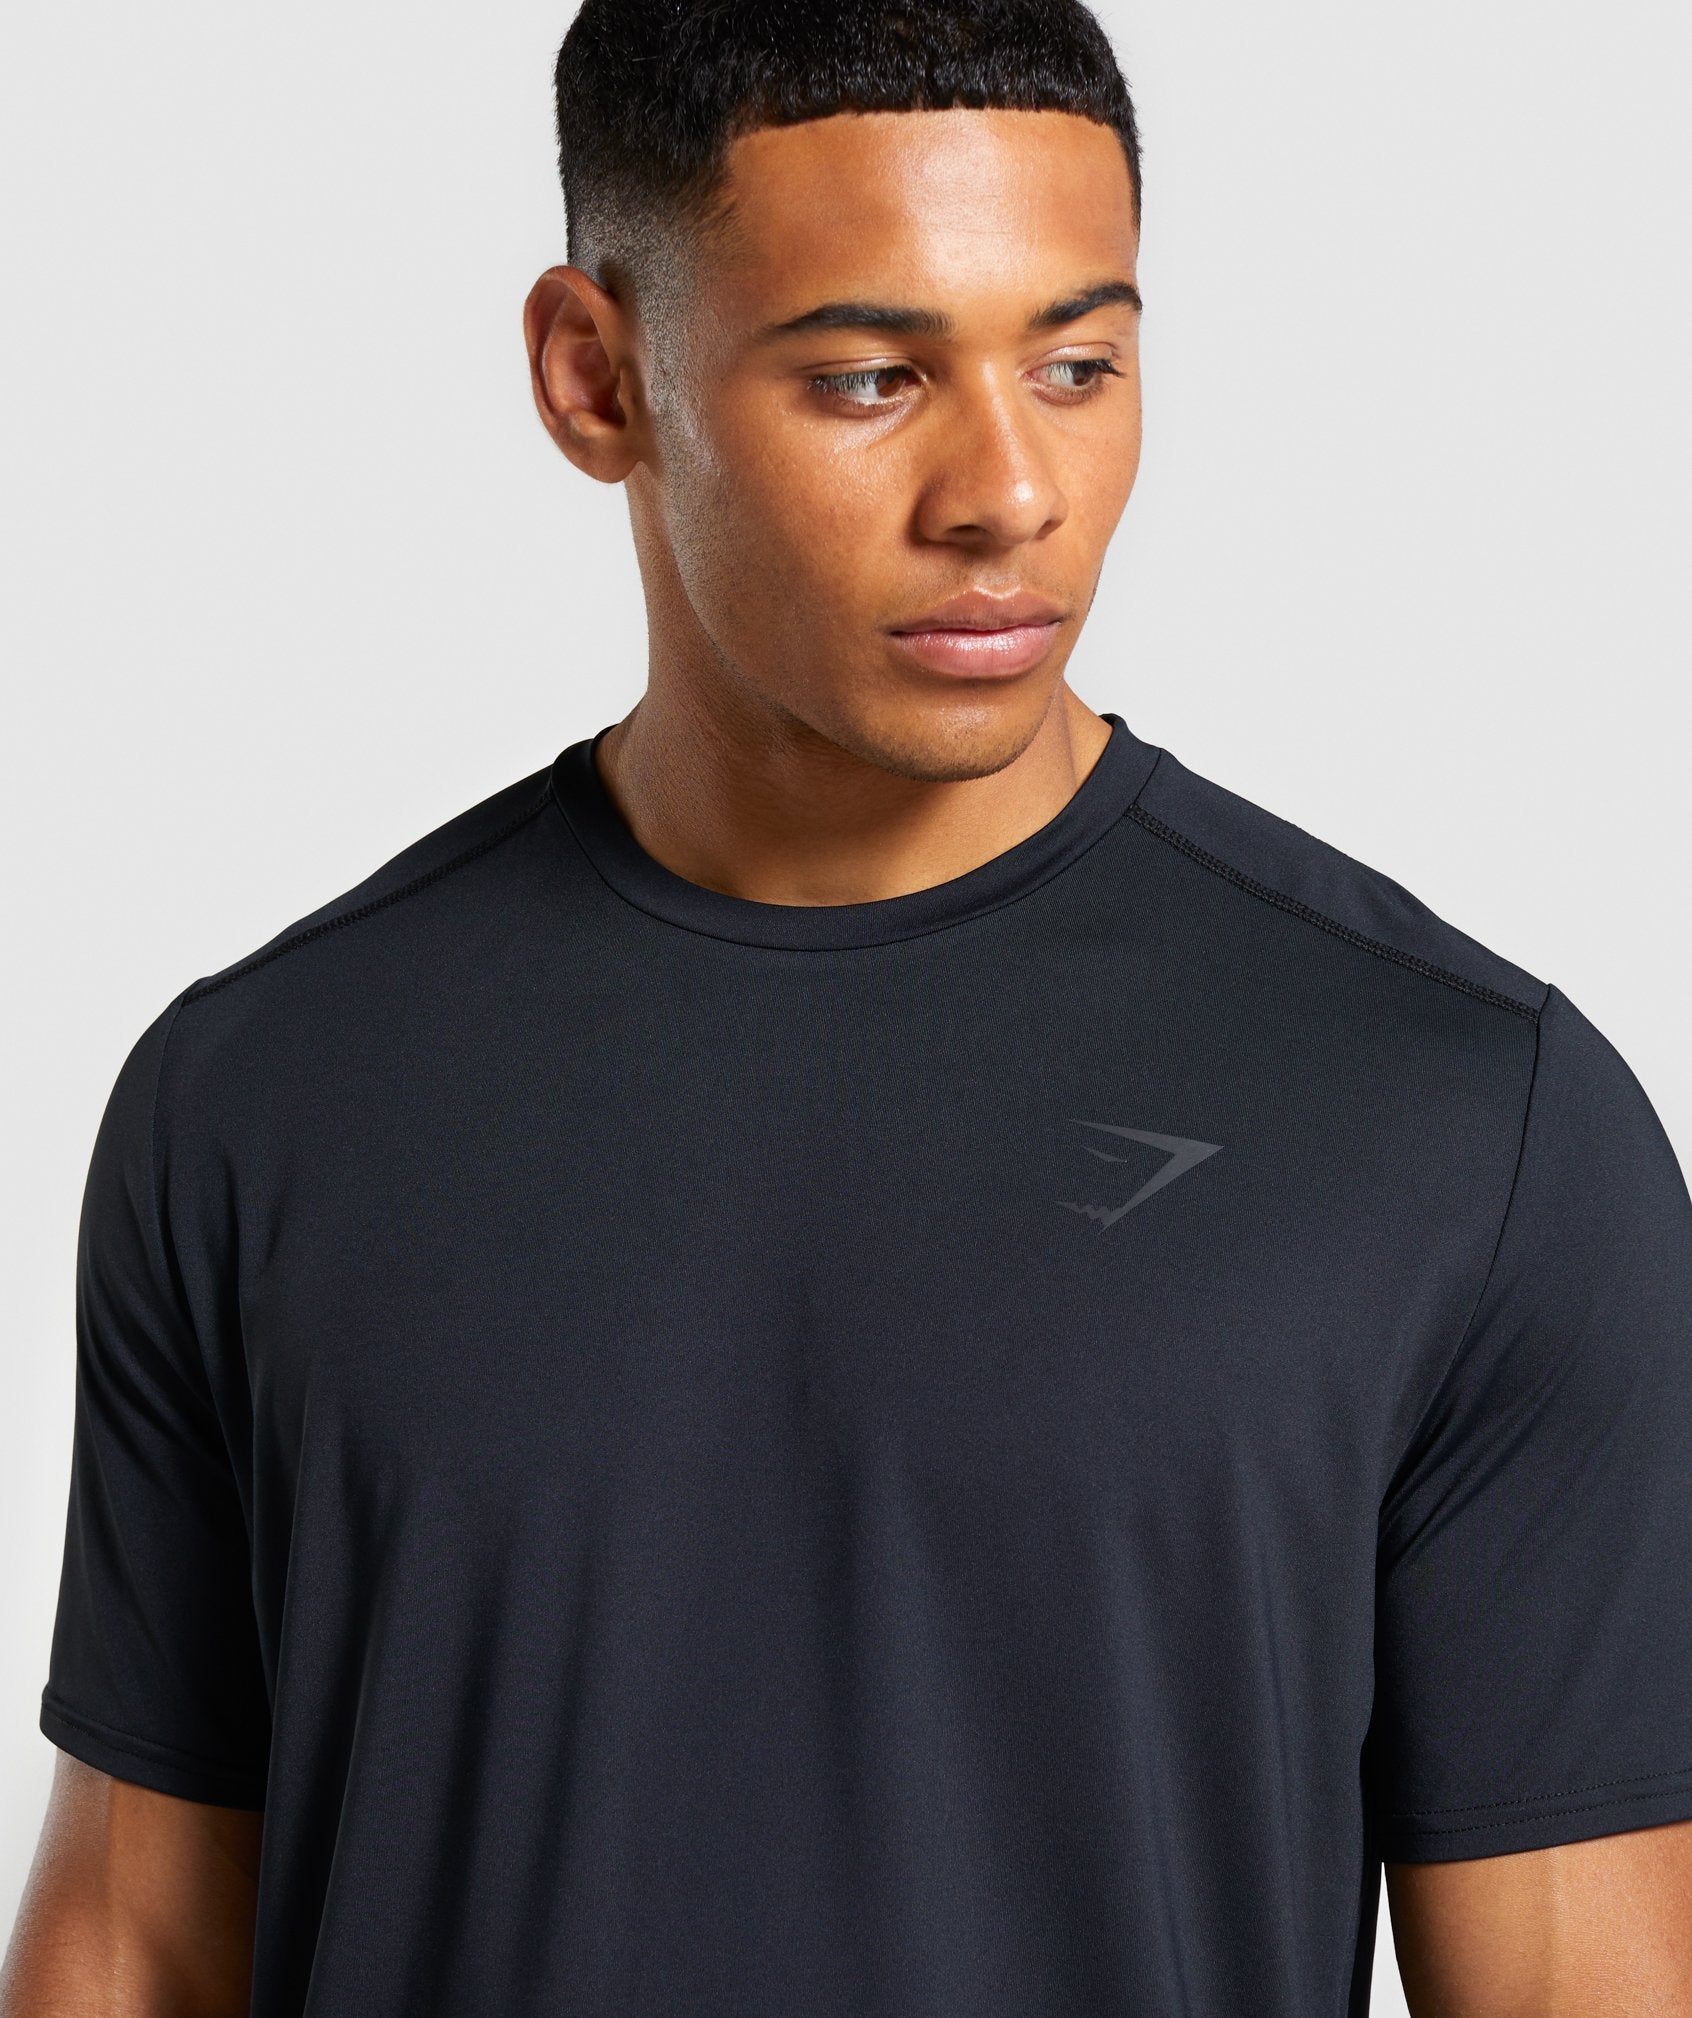 Raw T-Shirt in Black - view 5